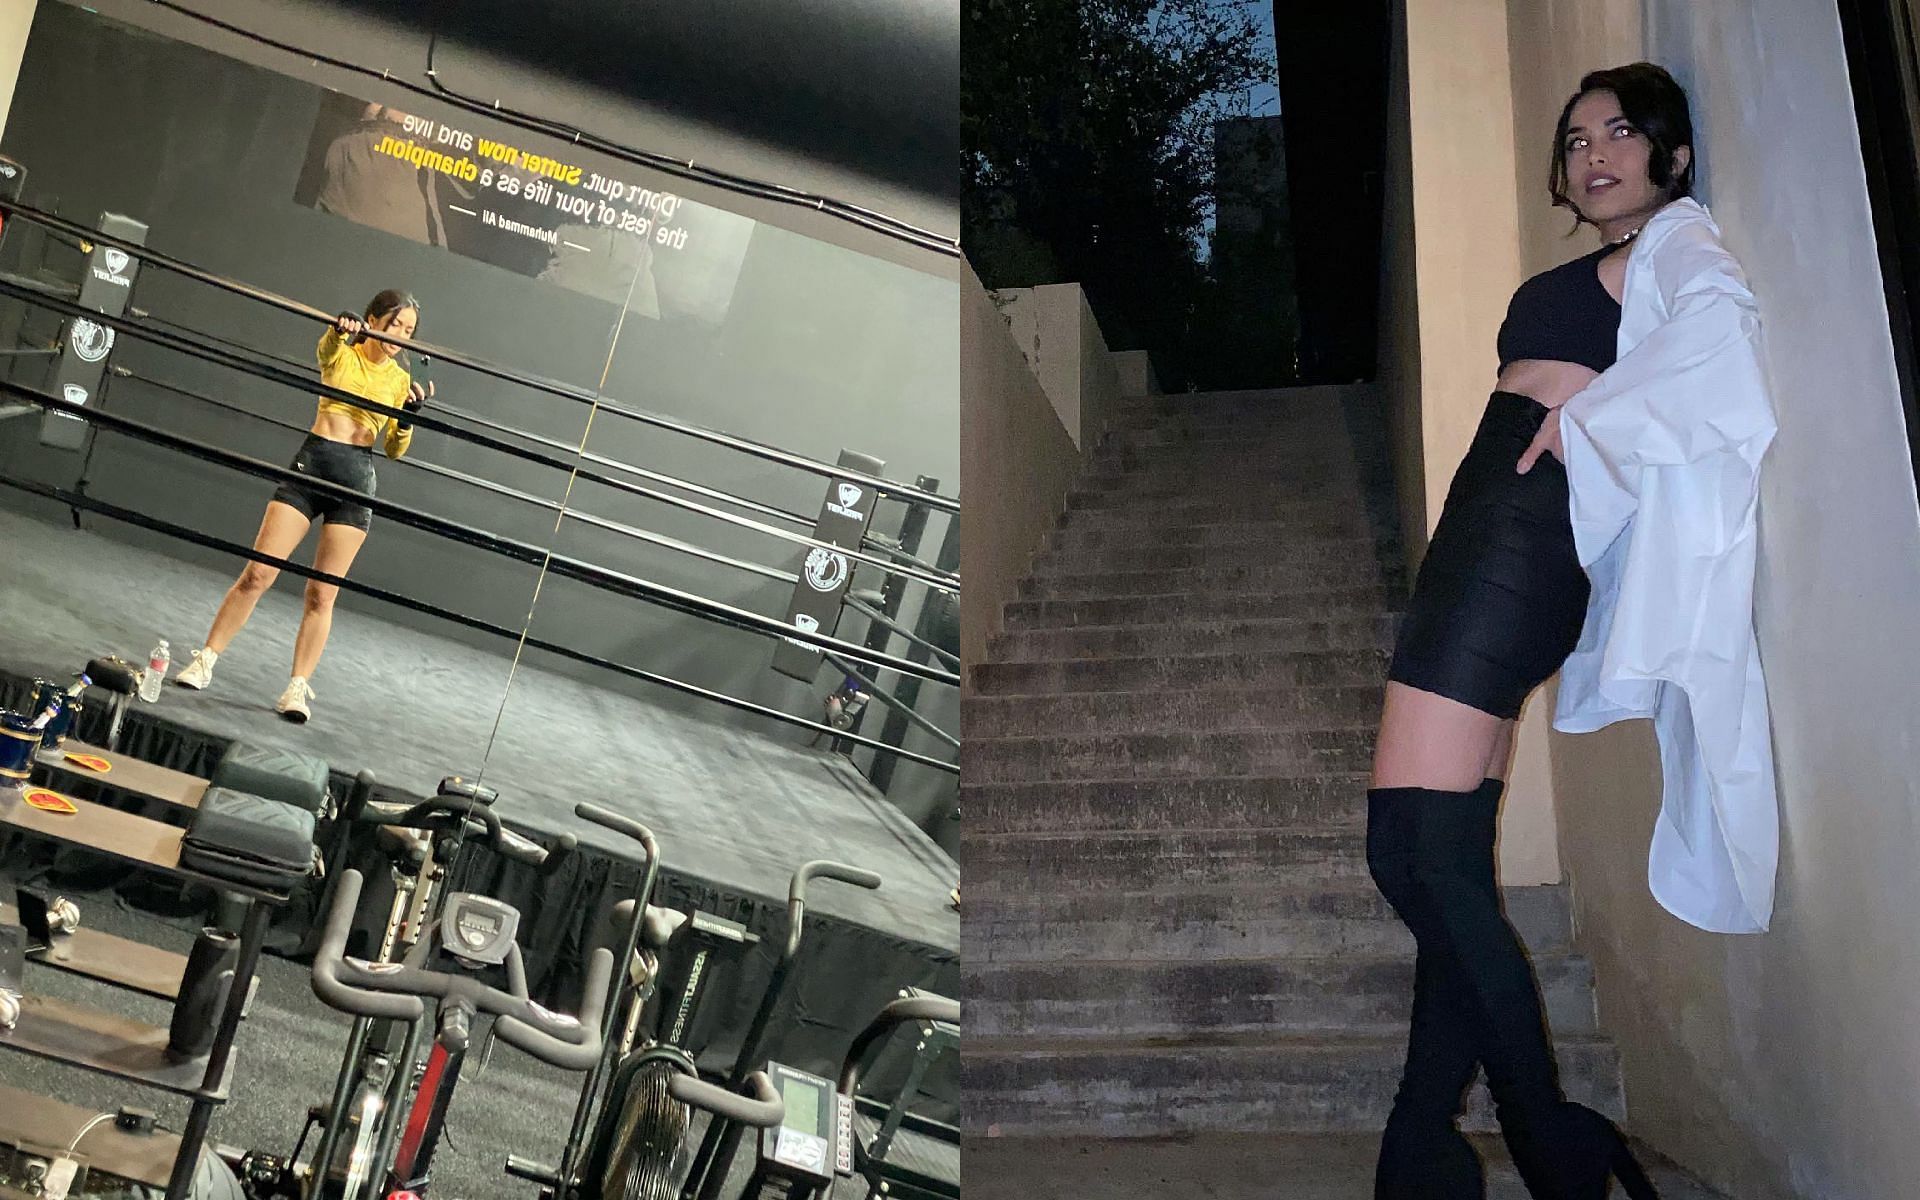 Fans on Twitter go wild as Valkyrae posts her boxing training images on the social media platform (Images via Valkyrae/Twitter)